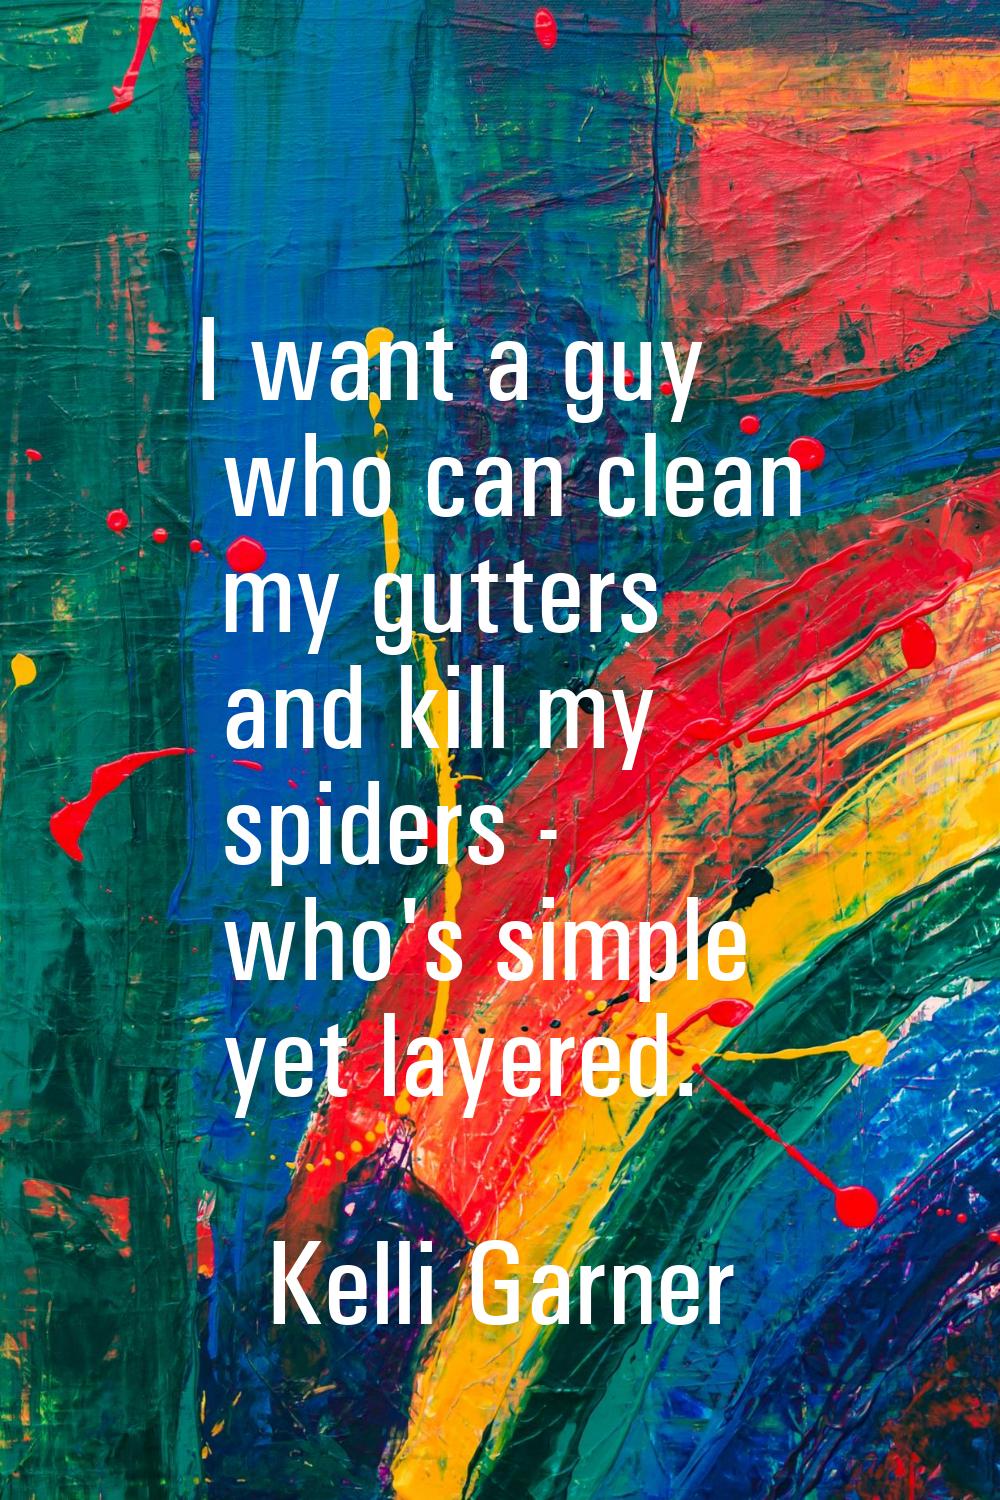 I want a guy who can clean my gutters and kill my spiders - who's simple yet layered.